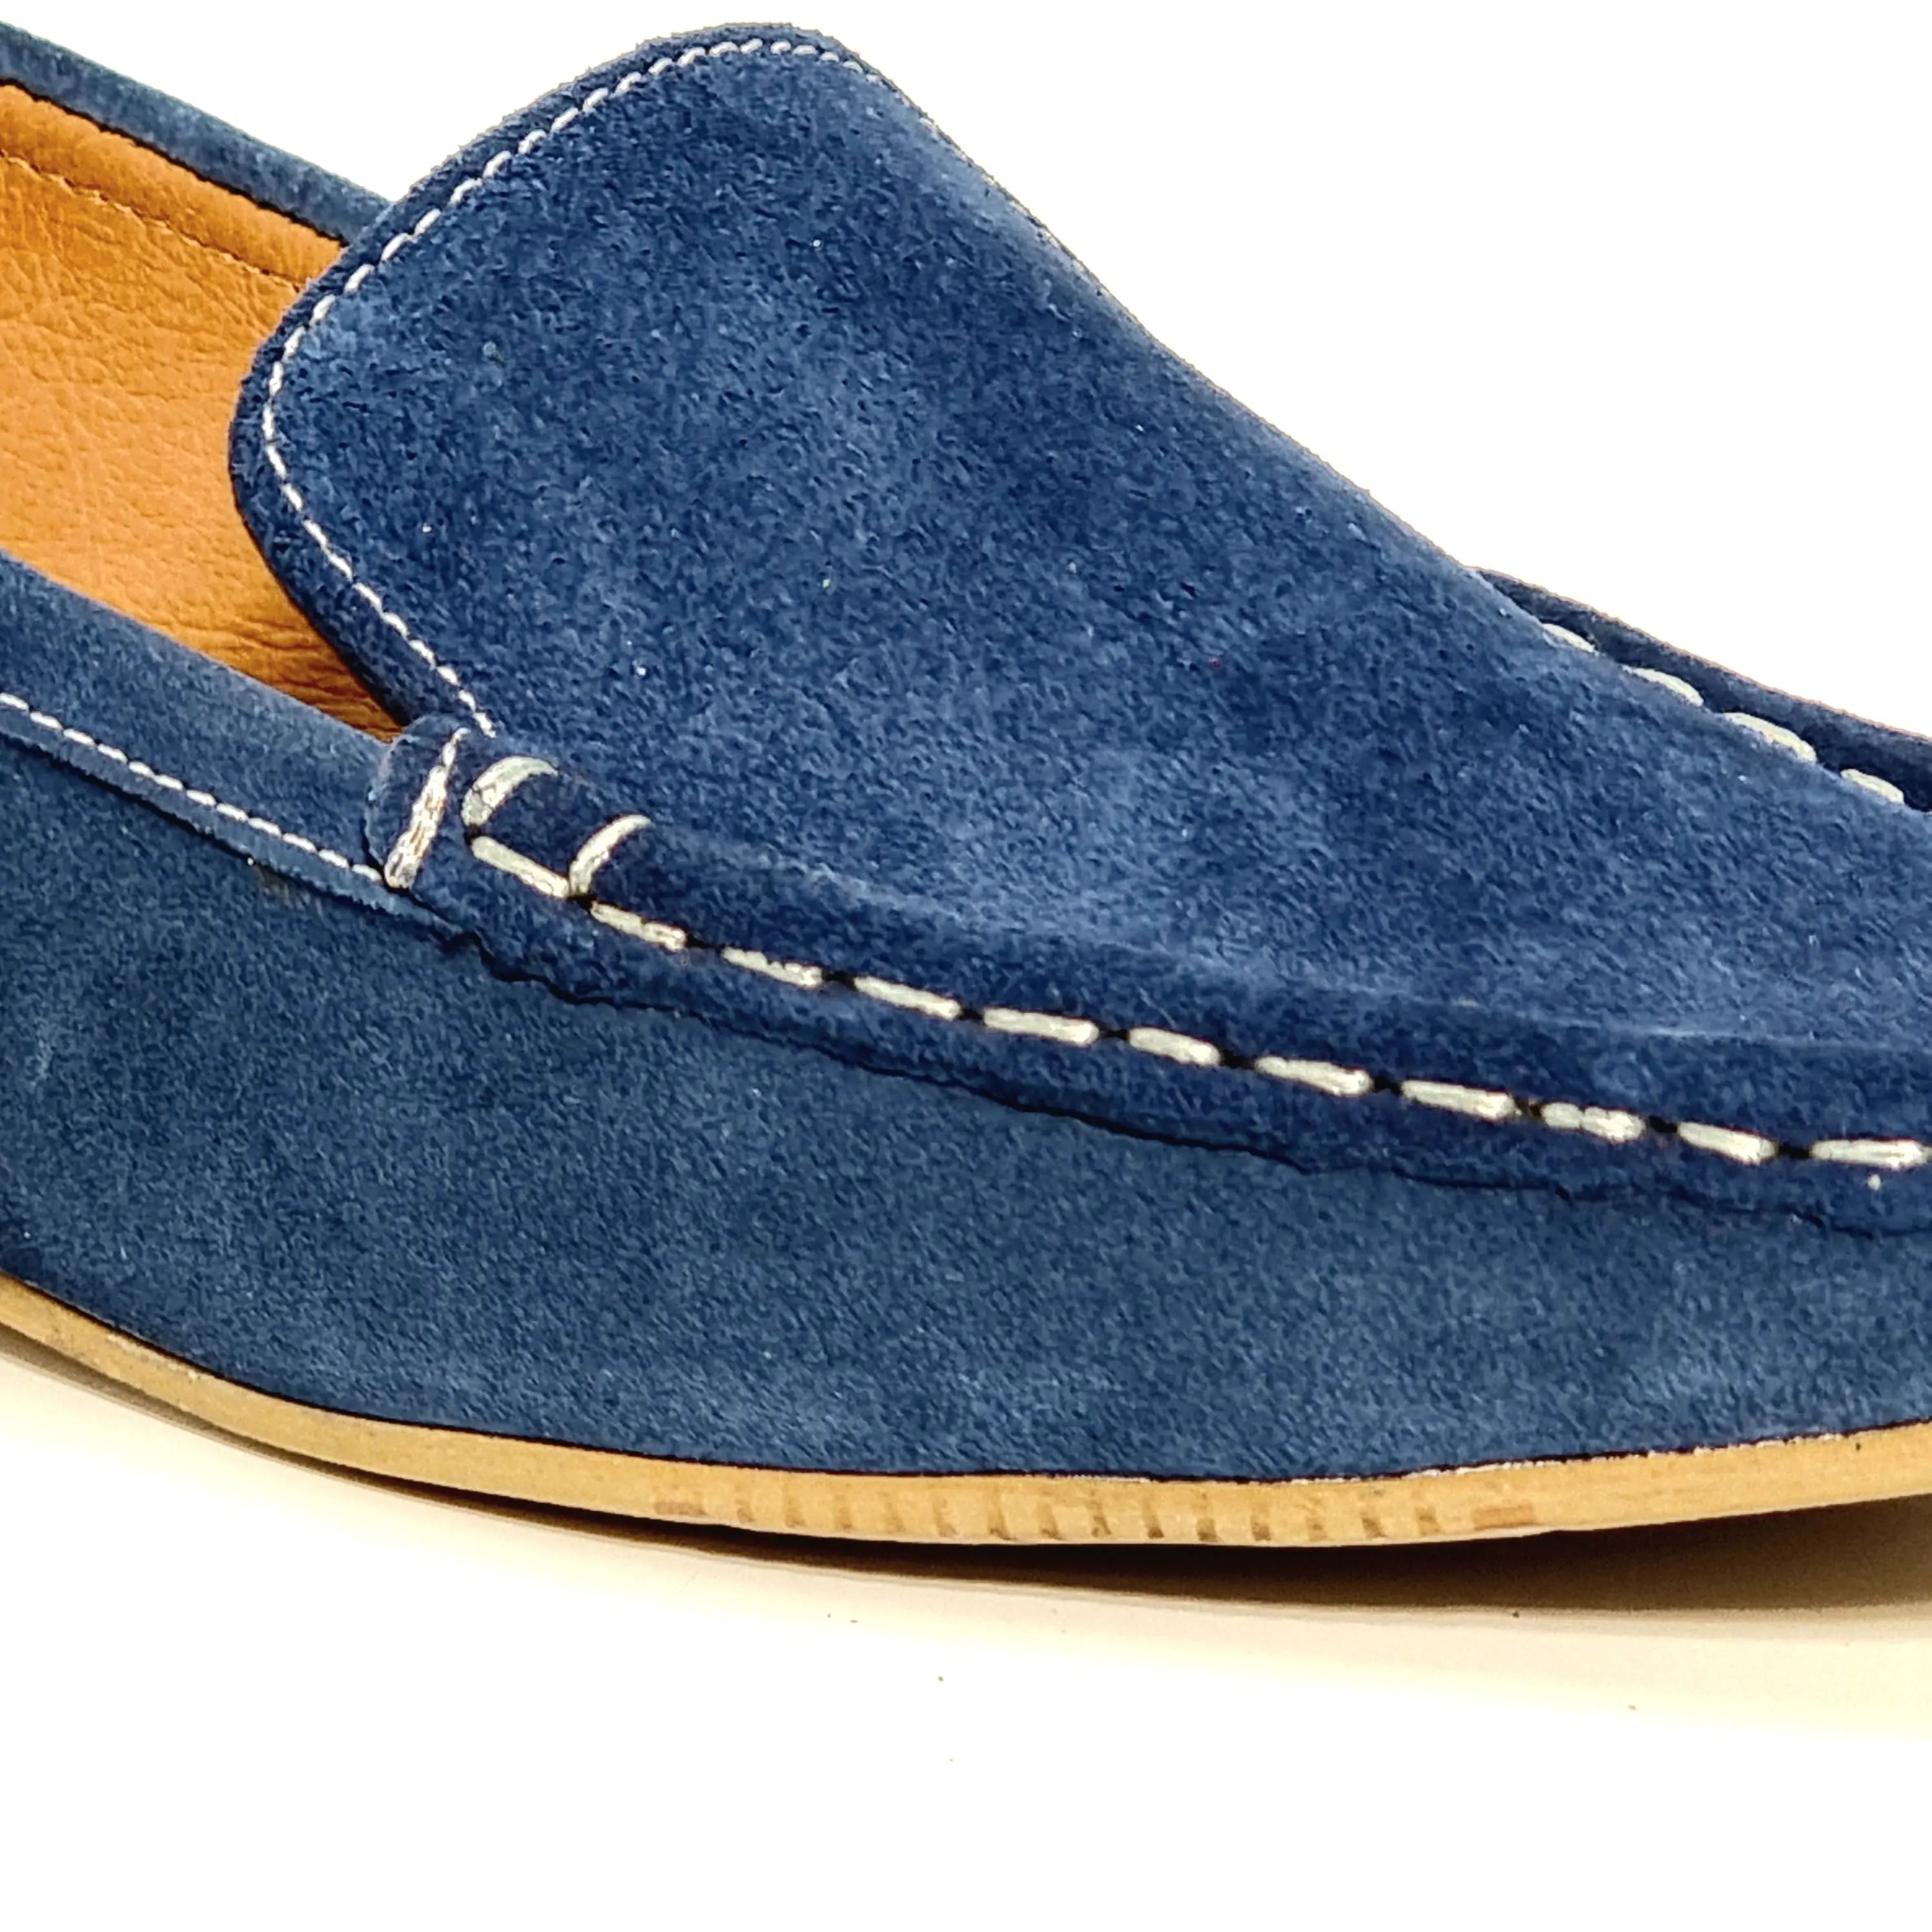 MARCHA 1703 BLUE Loafers | familyshoecentre